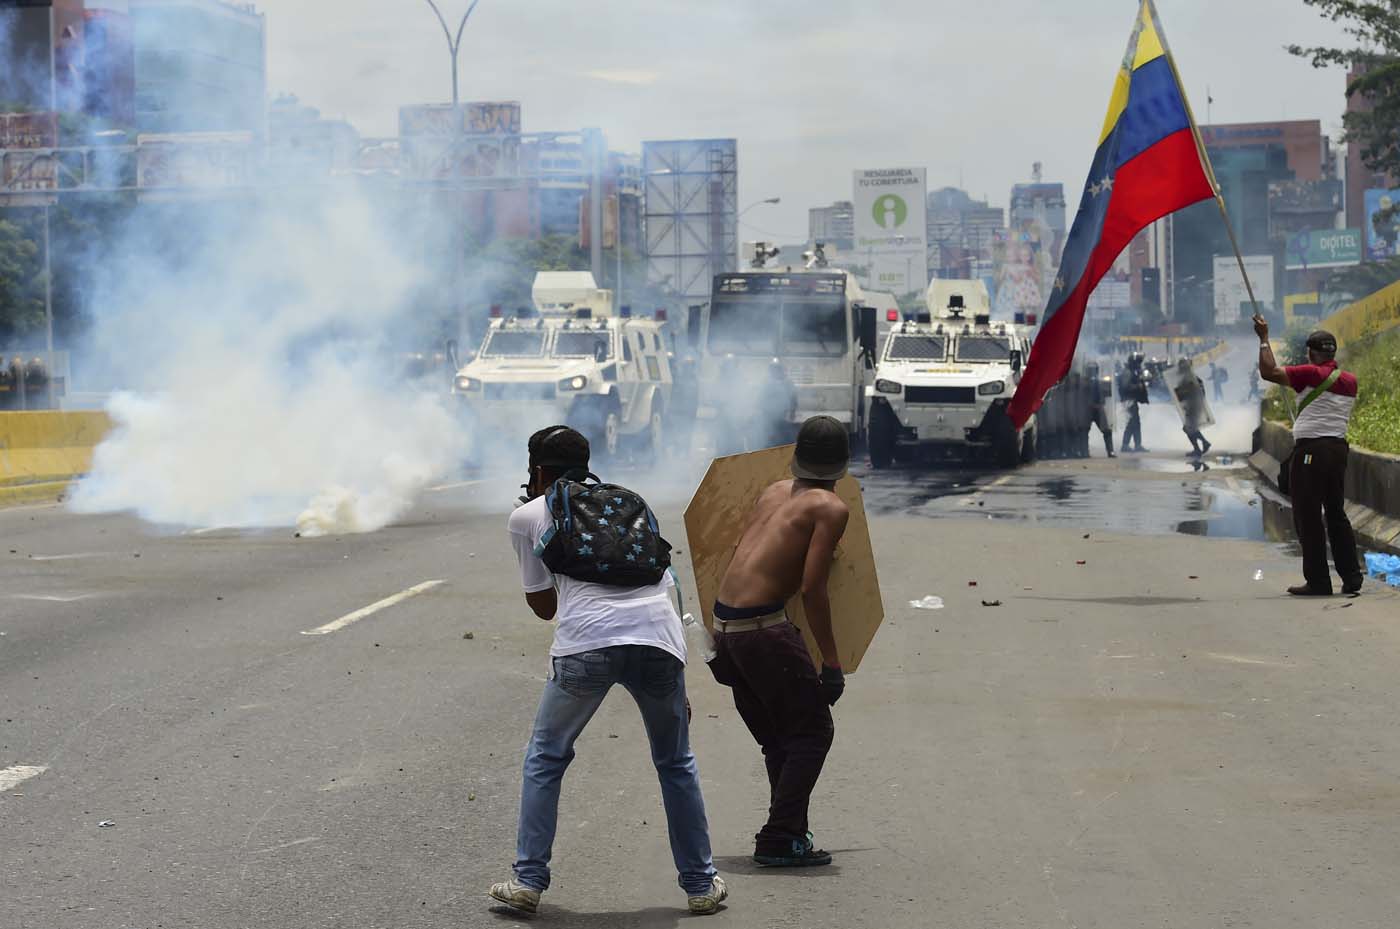 Demonstrators clash with riot police during a protest against Venezuelan President Nicolas Maduro, in Caracas on May 3, 2017. Venezuela's angry opposition rallied Wednesday vowing huge street protests against President Nicolas Maduro's plan to rewrite the constitution and accusing him of dodging elections to cling to power despite deadly unrest. / AFP PHOTO / RONALDO SCHEMIDT